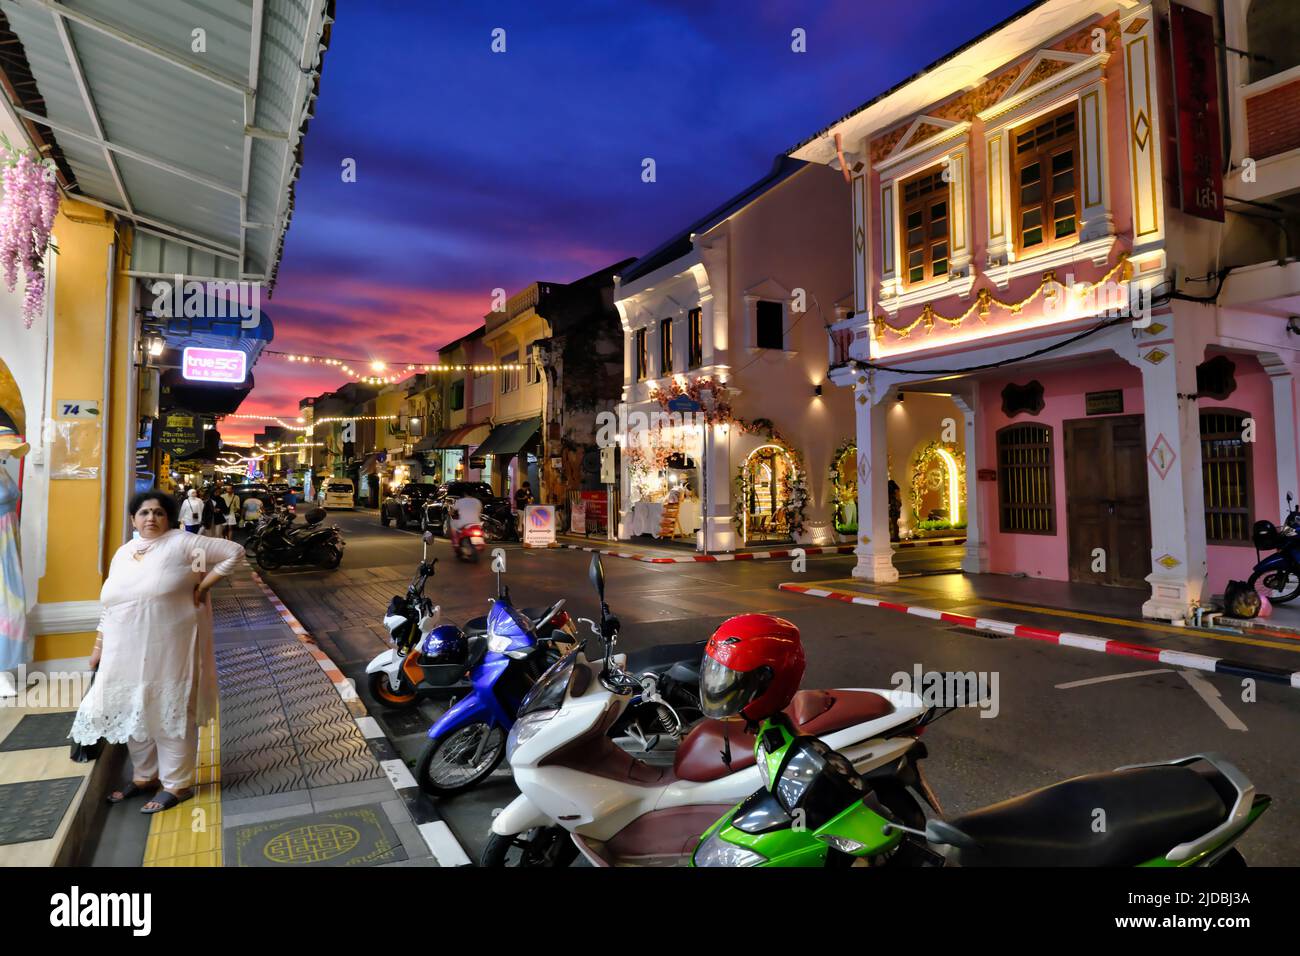 Dusk falls on the picturesque Sino-Portuguese or Peranakan shophouses in Thalang Road in the Old Town heritage area of Phuket Town, Phuket, Thailand Stock Photo